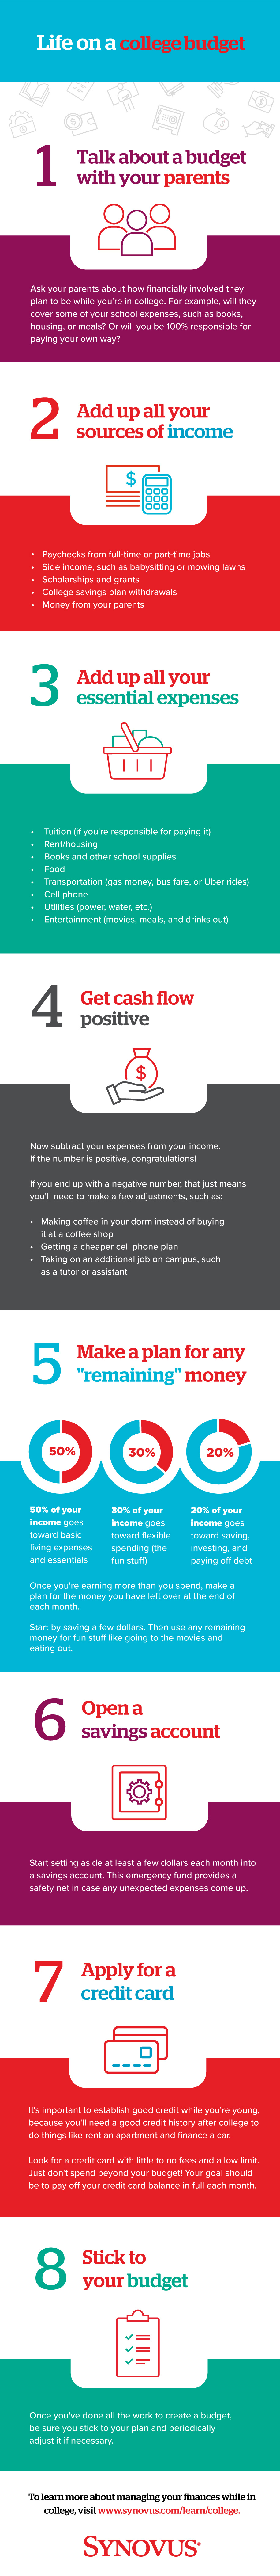 Infographic describing how to manage your money in college. A full description is available through a link beneath the image.